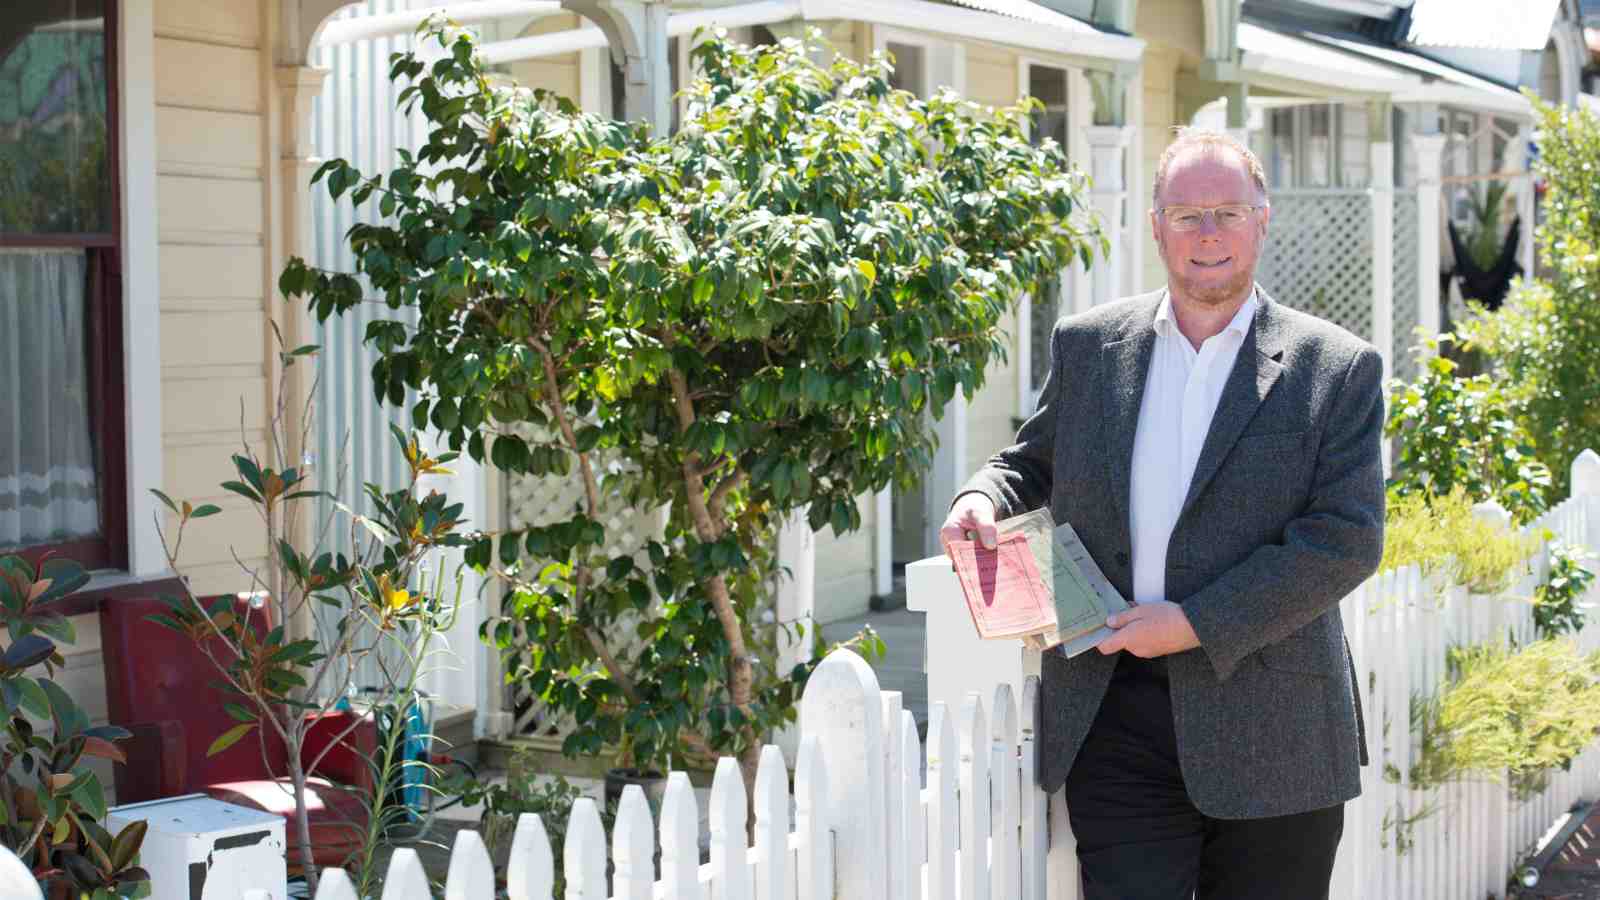 Nigel Isaacs holding building act books outside Victorian style homes in Wellington